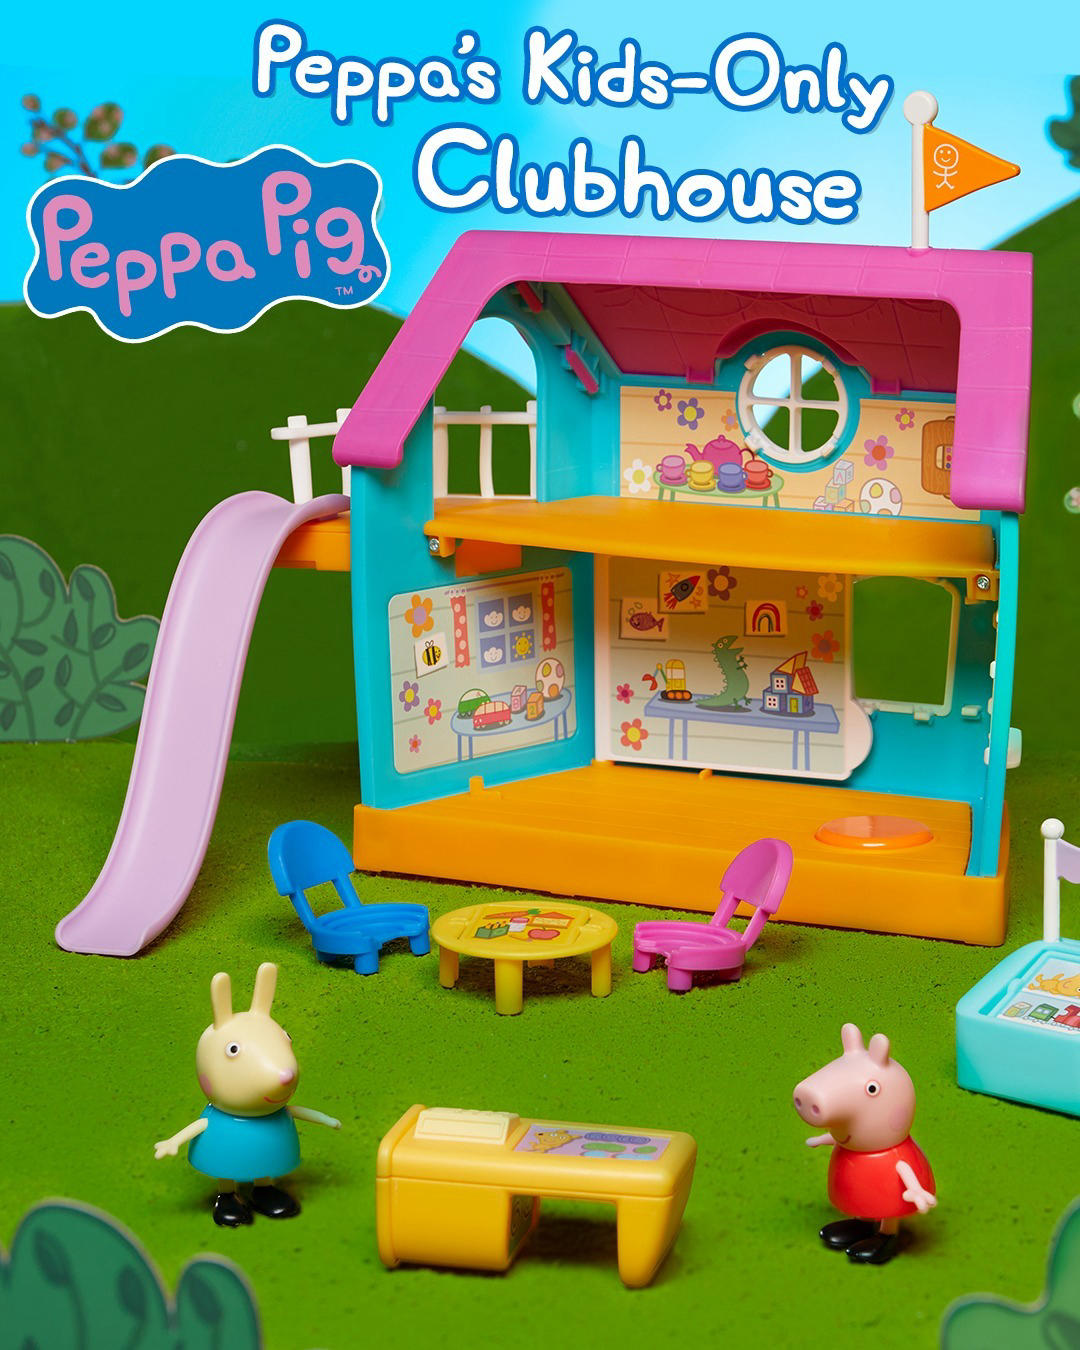 Peppa Pig - Your little piggies will love joining Peppa